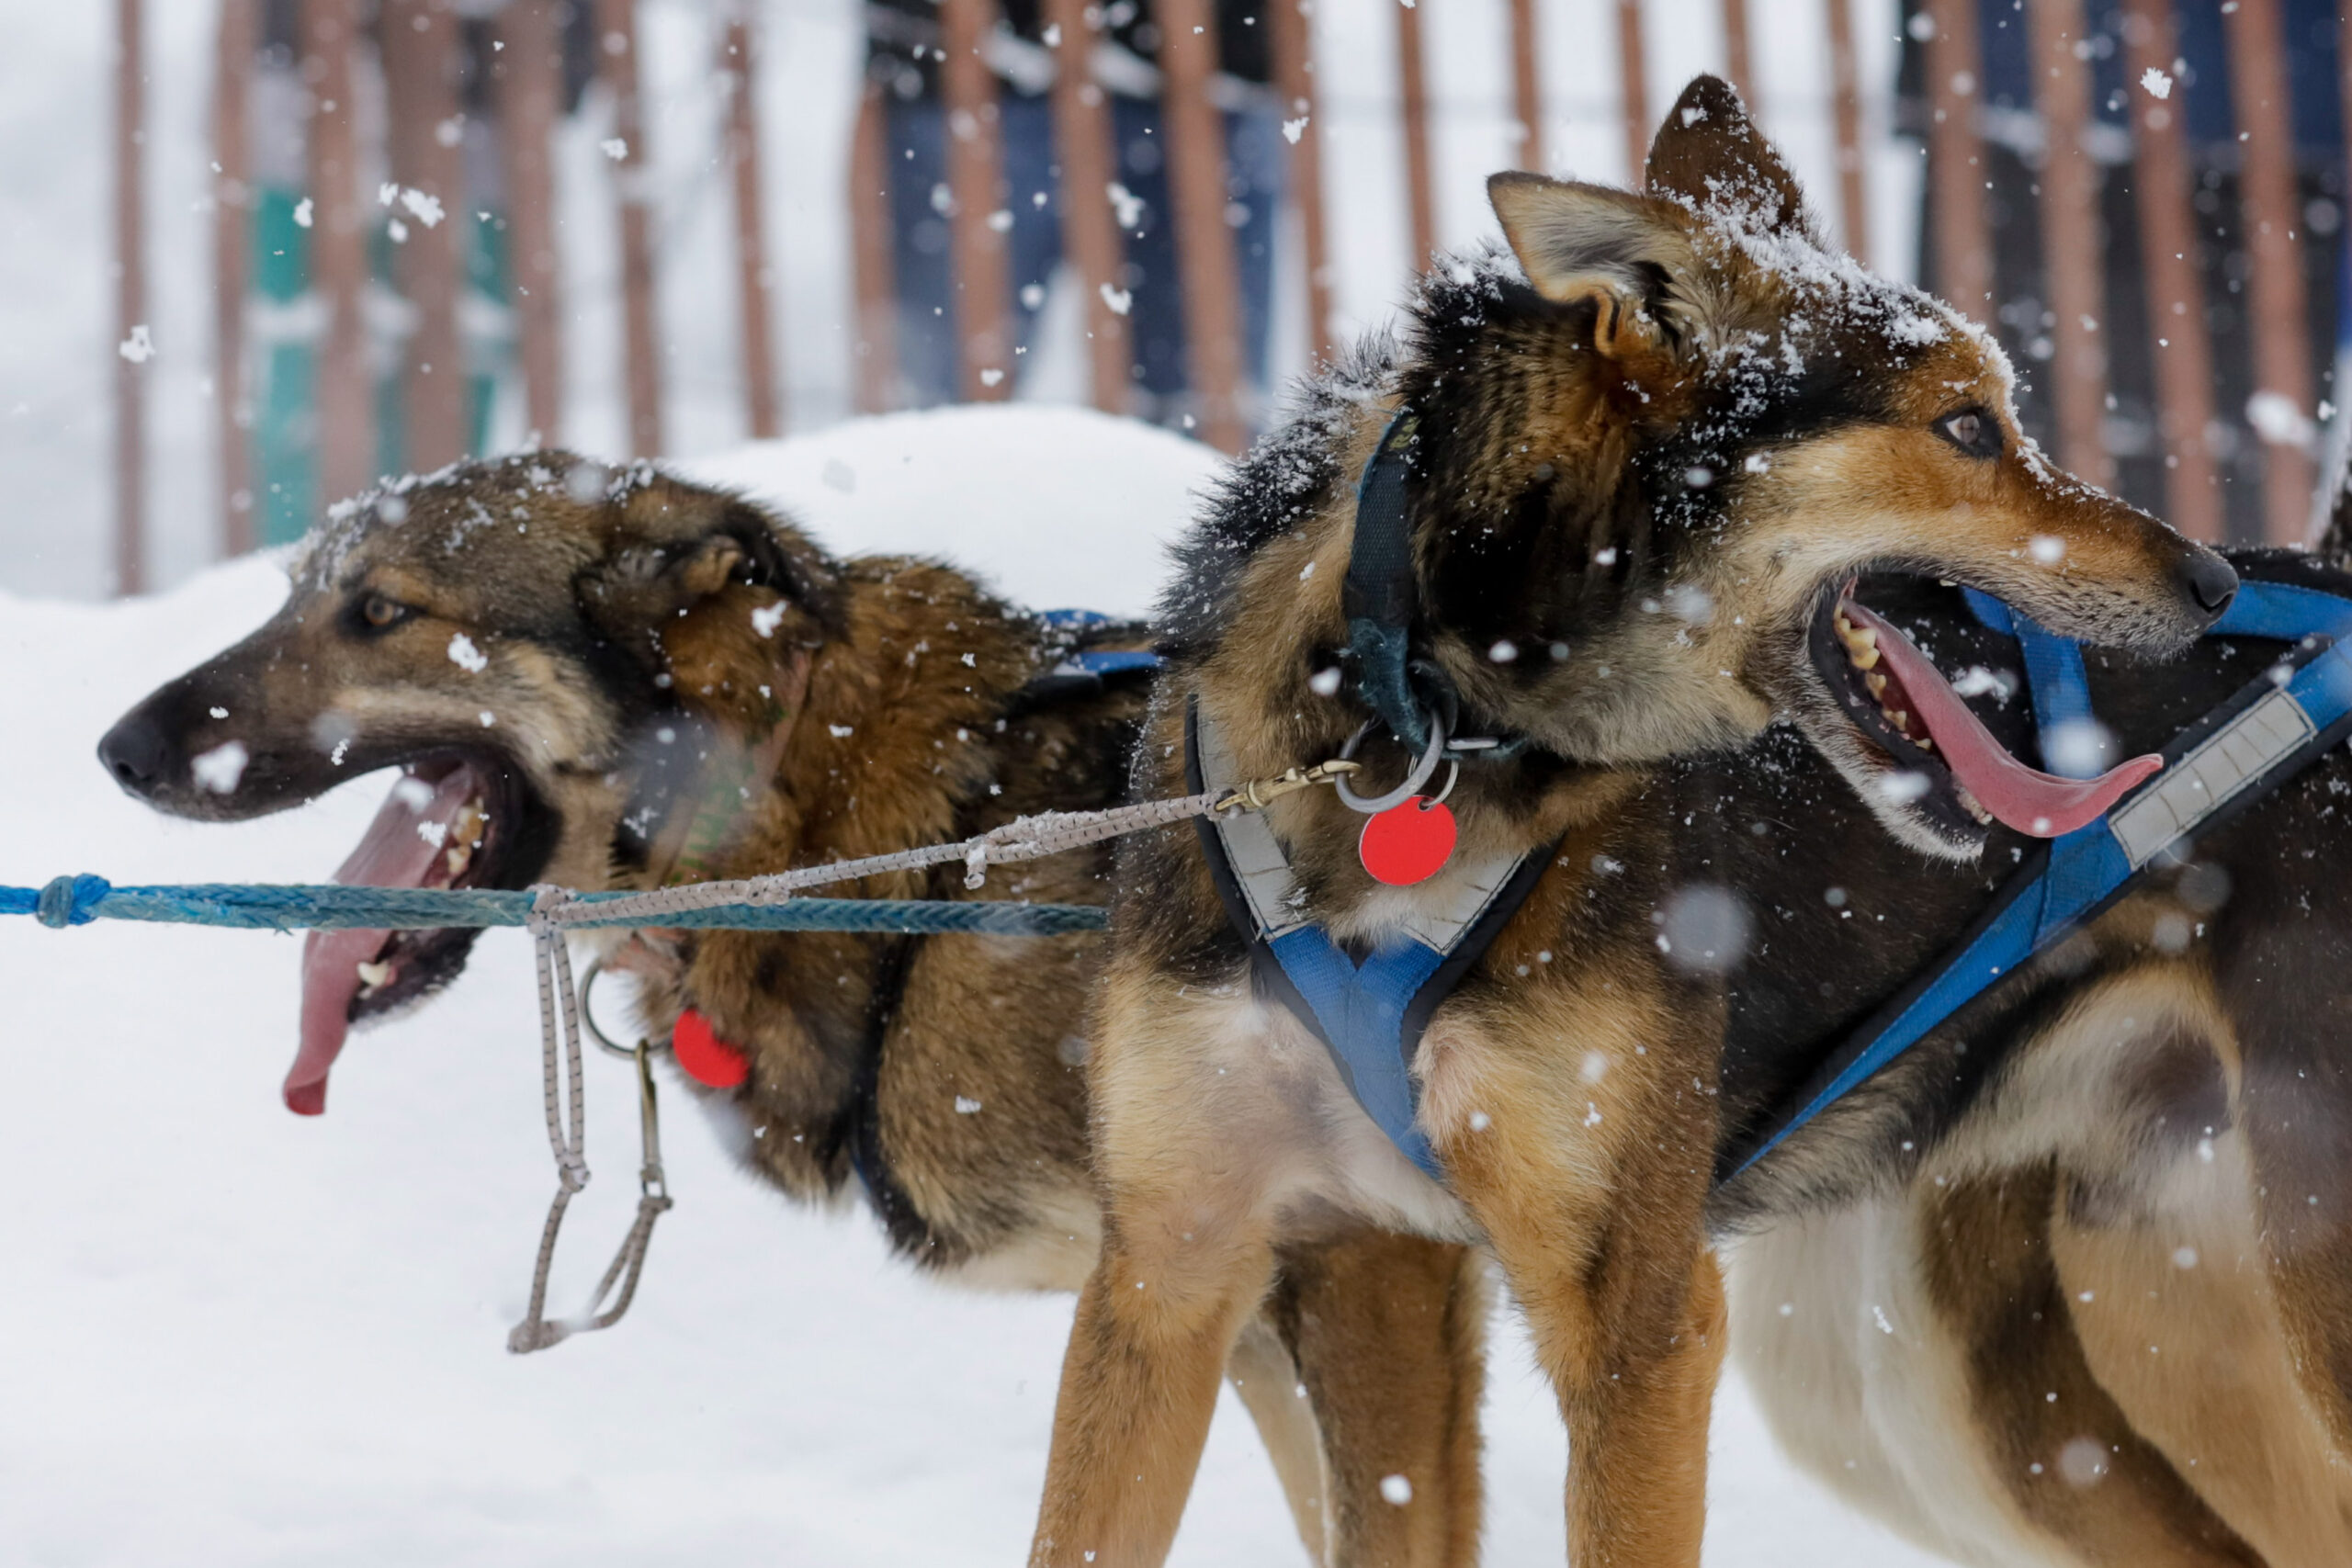 Our favorite 30 photos from the snowy 2022 Iditarod ceremonial start